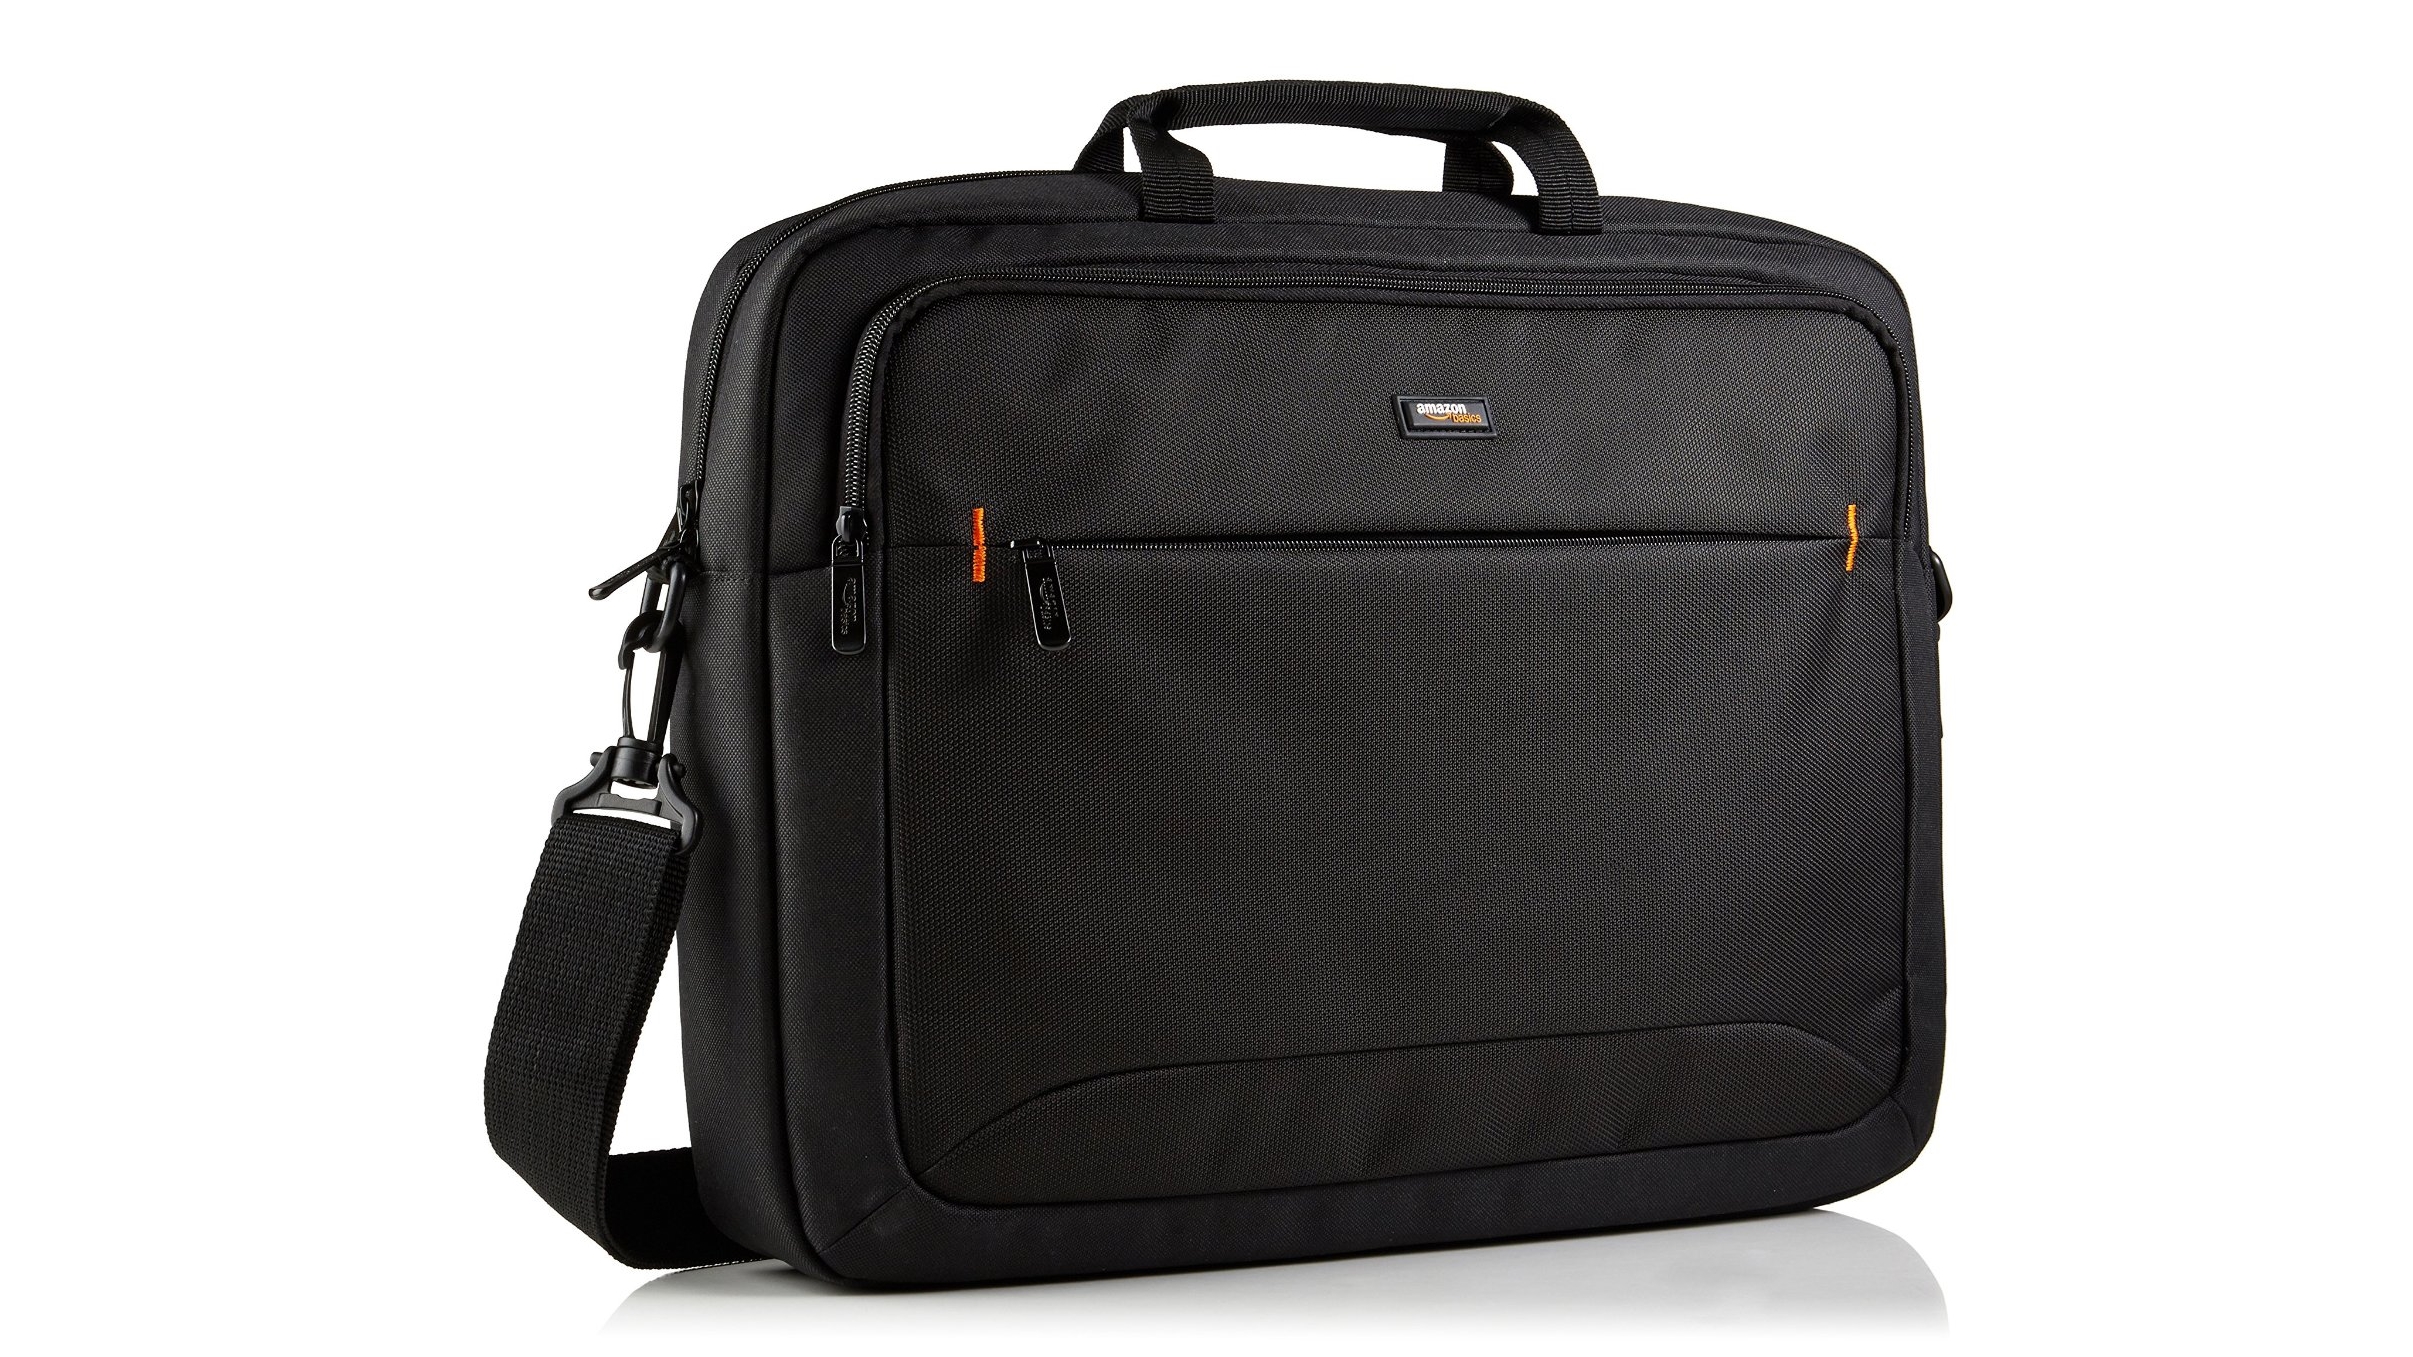 The best laptop bags and backpacks for business use 2018 – scenz kuch esa haen